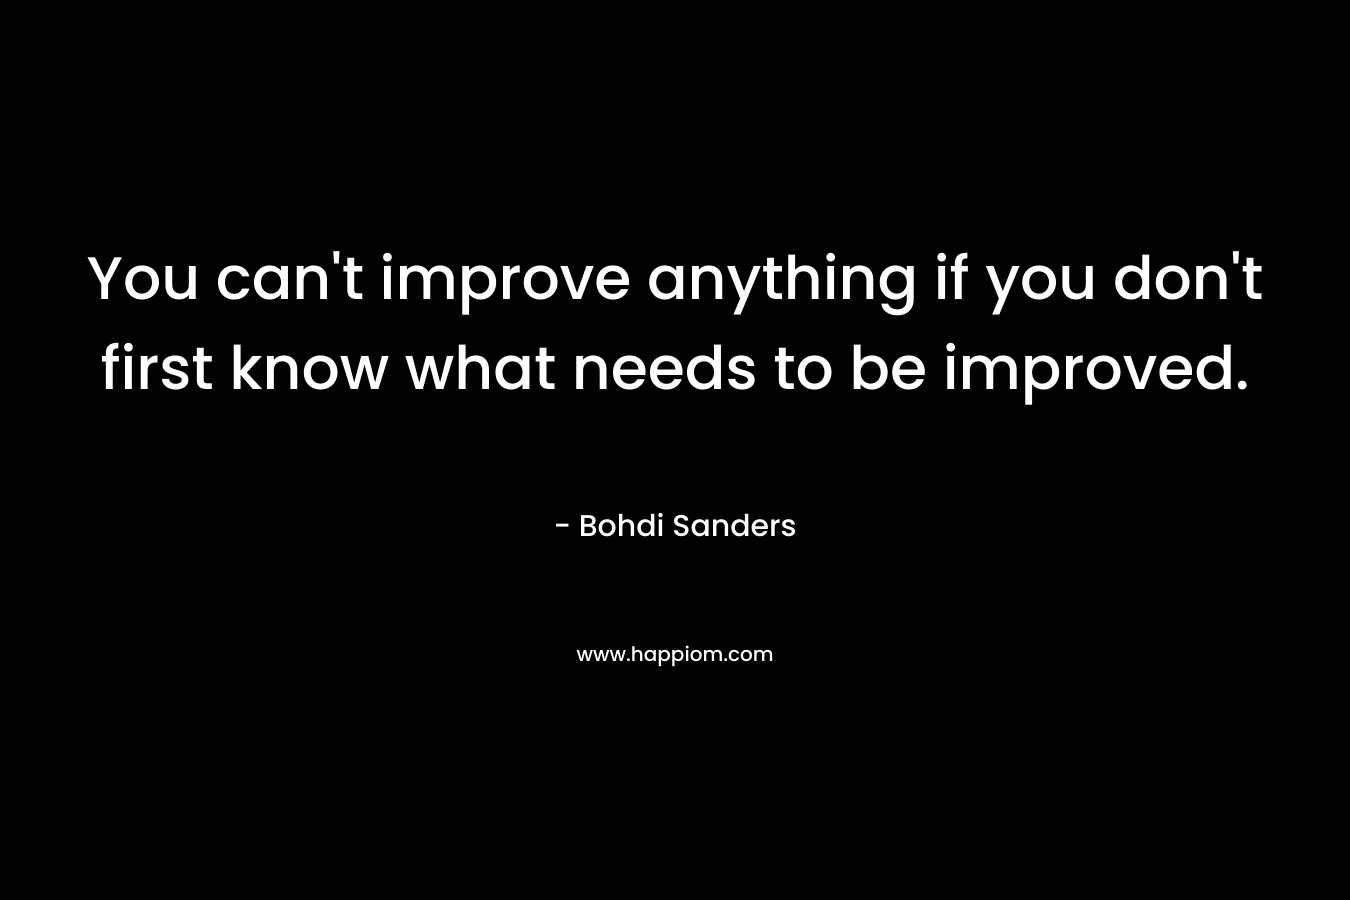 You can't improve anything if you don't first know what needs to be improved.